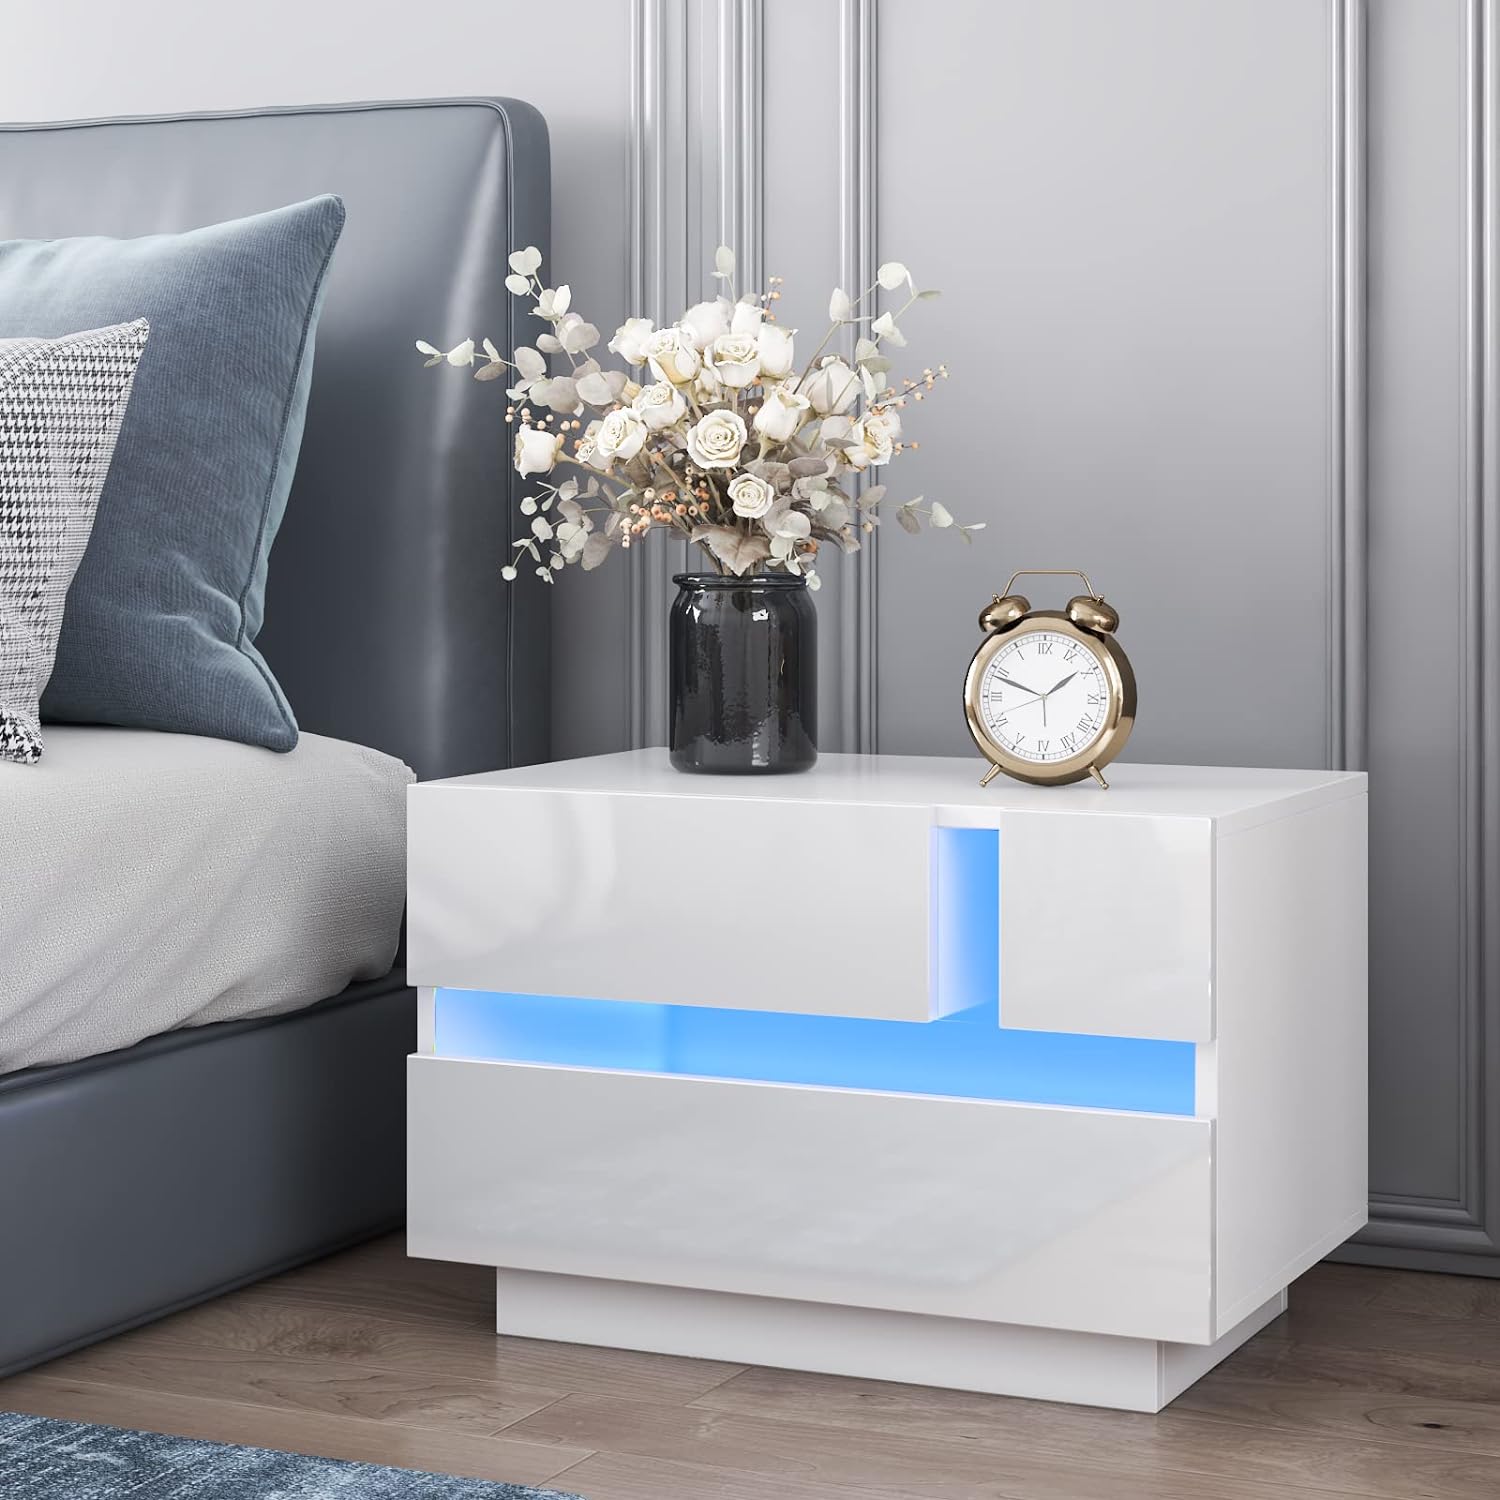 HOMMPA LED Nightstand White Nightstand with 2 High Gloss Drawers Modern 15.7 Tall Low Profile LED Night Stand for Low Beds Wood Matte Bedside Table with Plug in LED Light for Bedroom